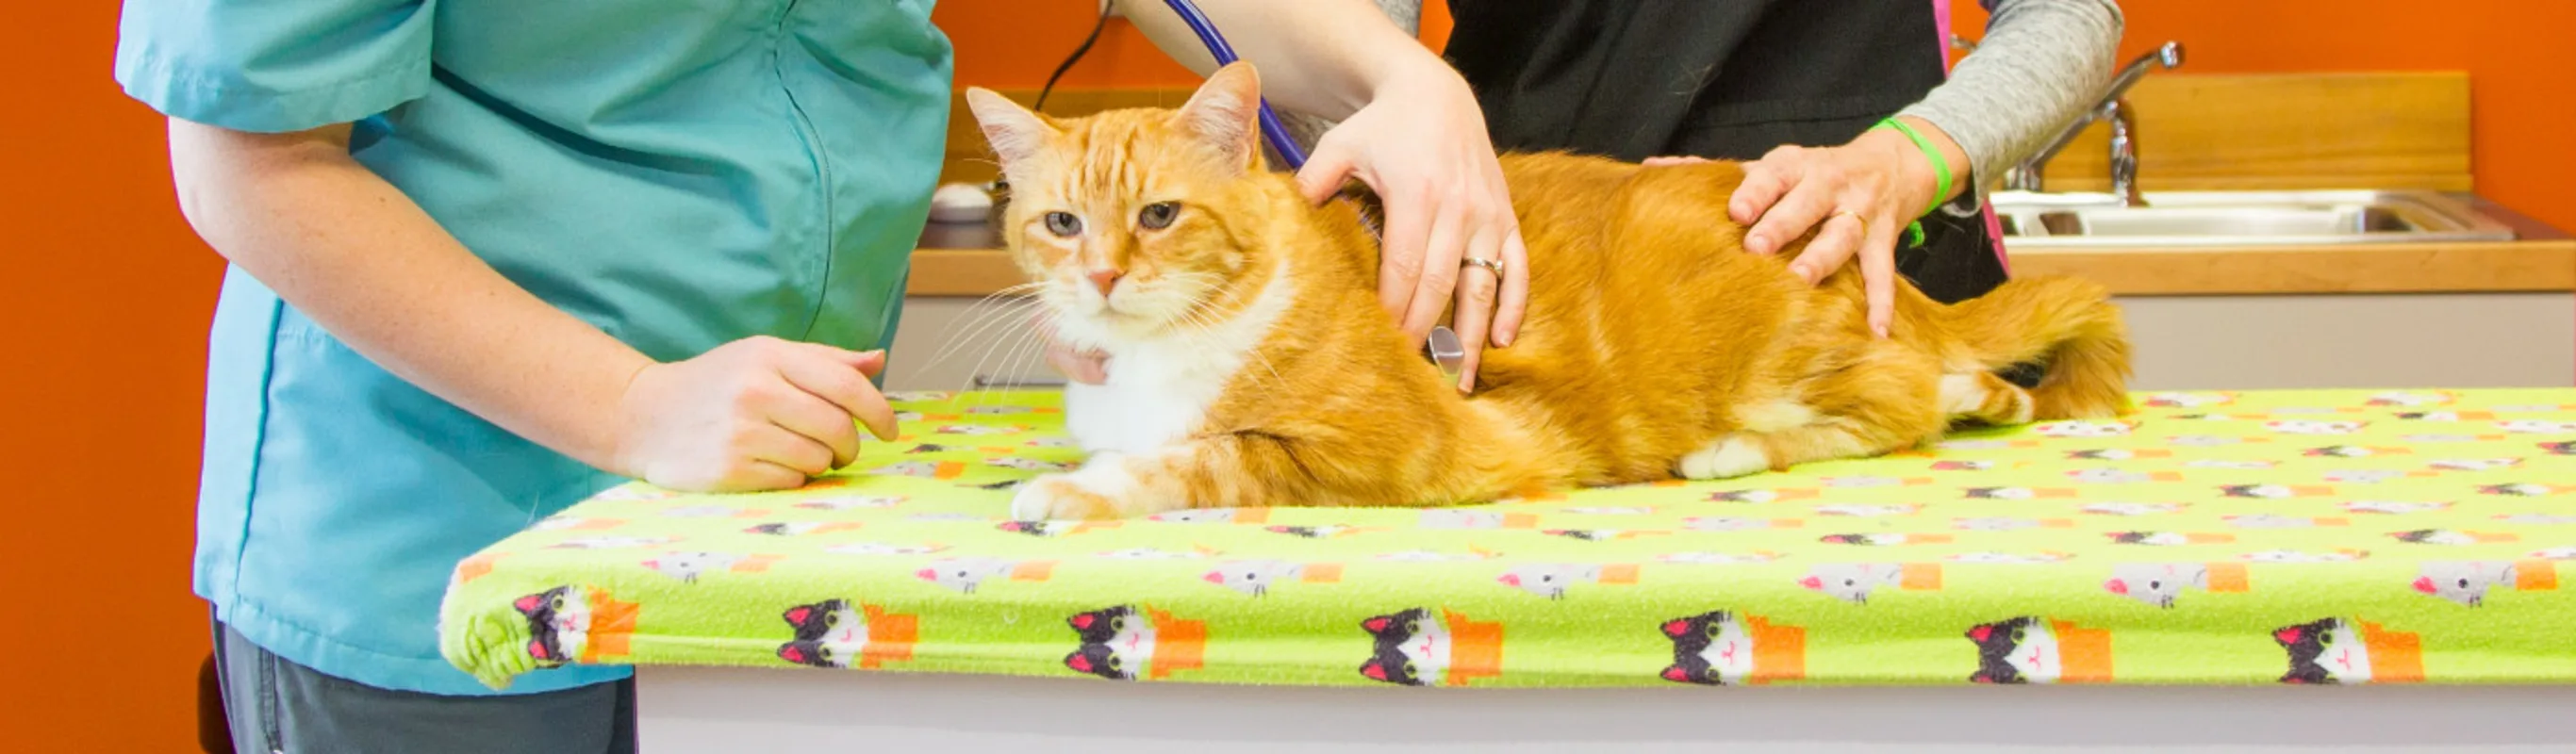 Orange cat being cared for on a yellow table in an orange room